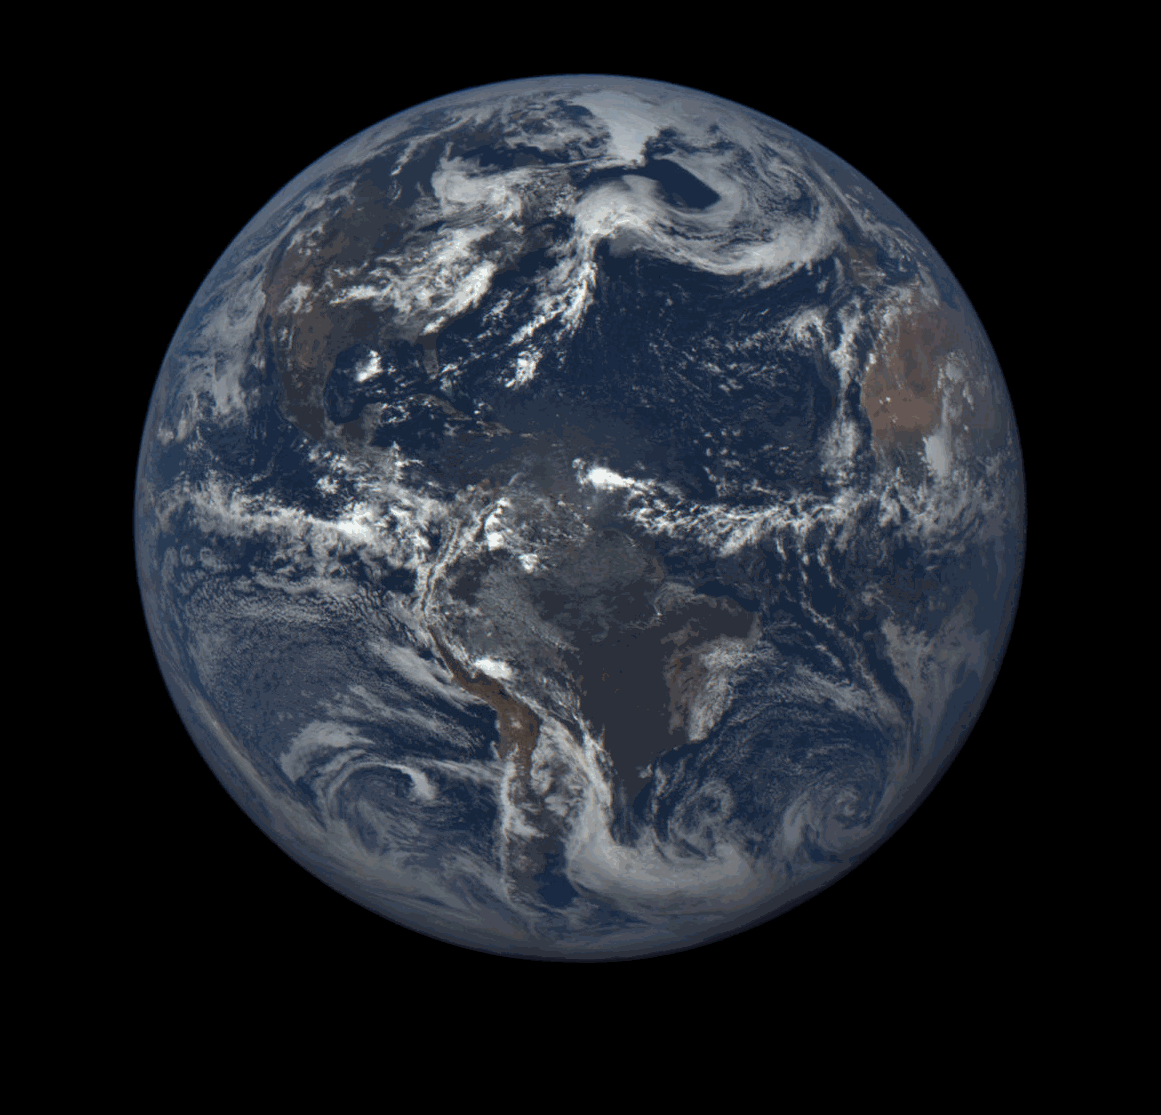 A day in the life of Earth, as seen from a million miles away